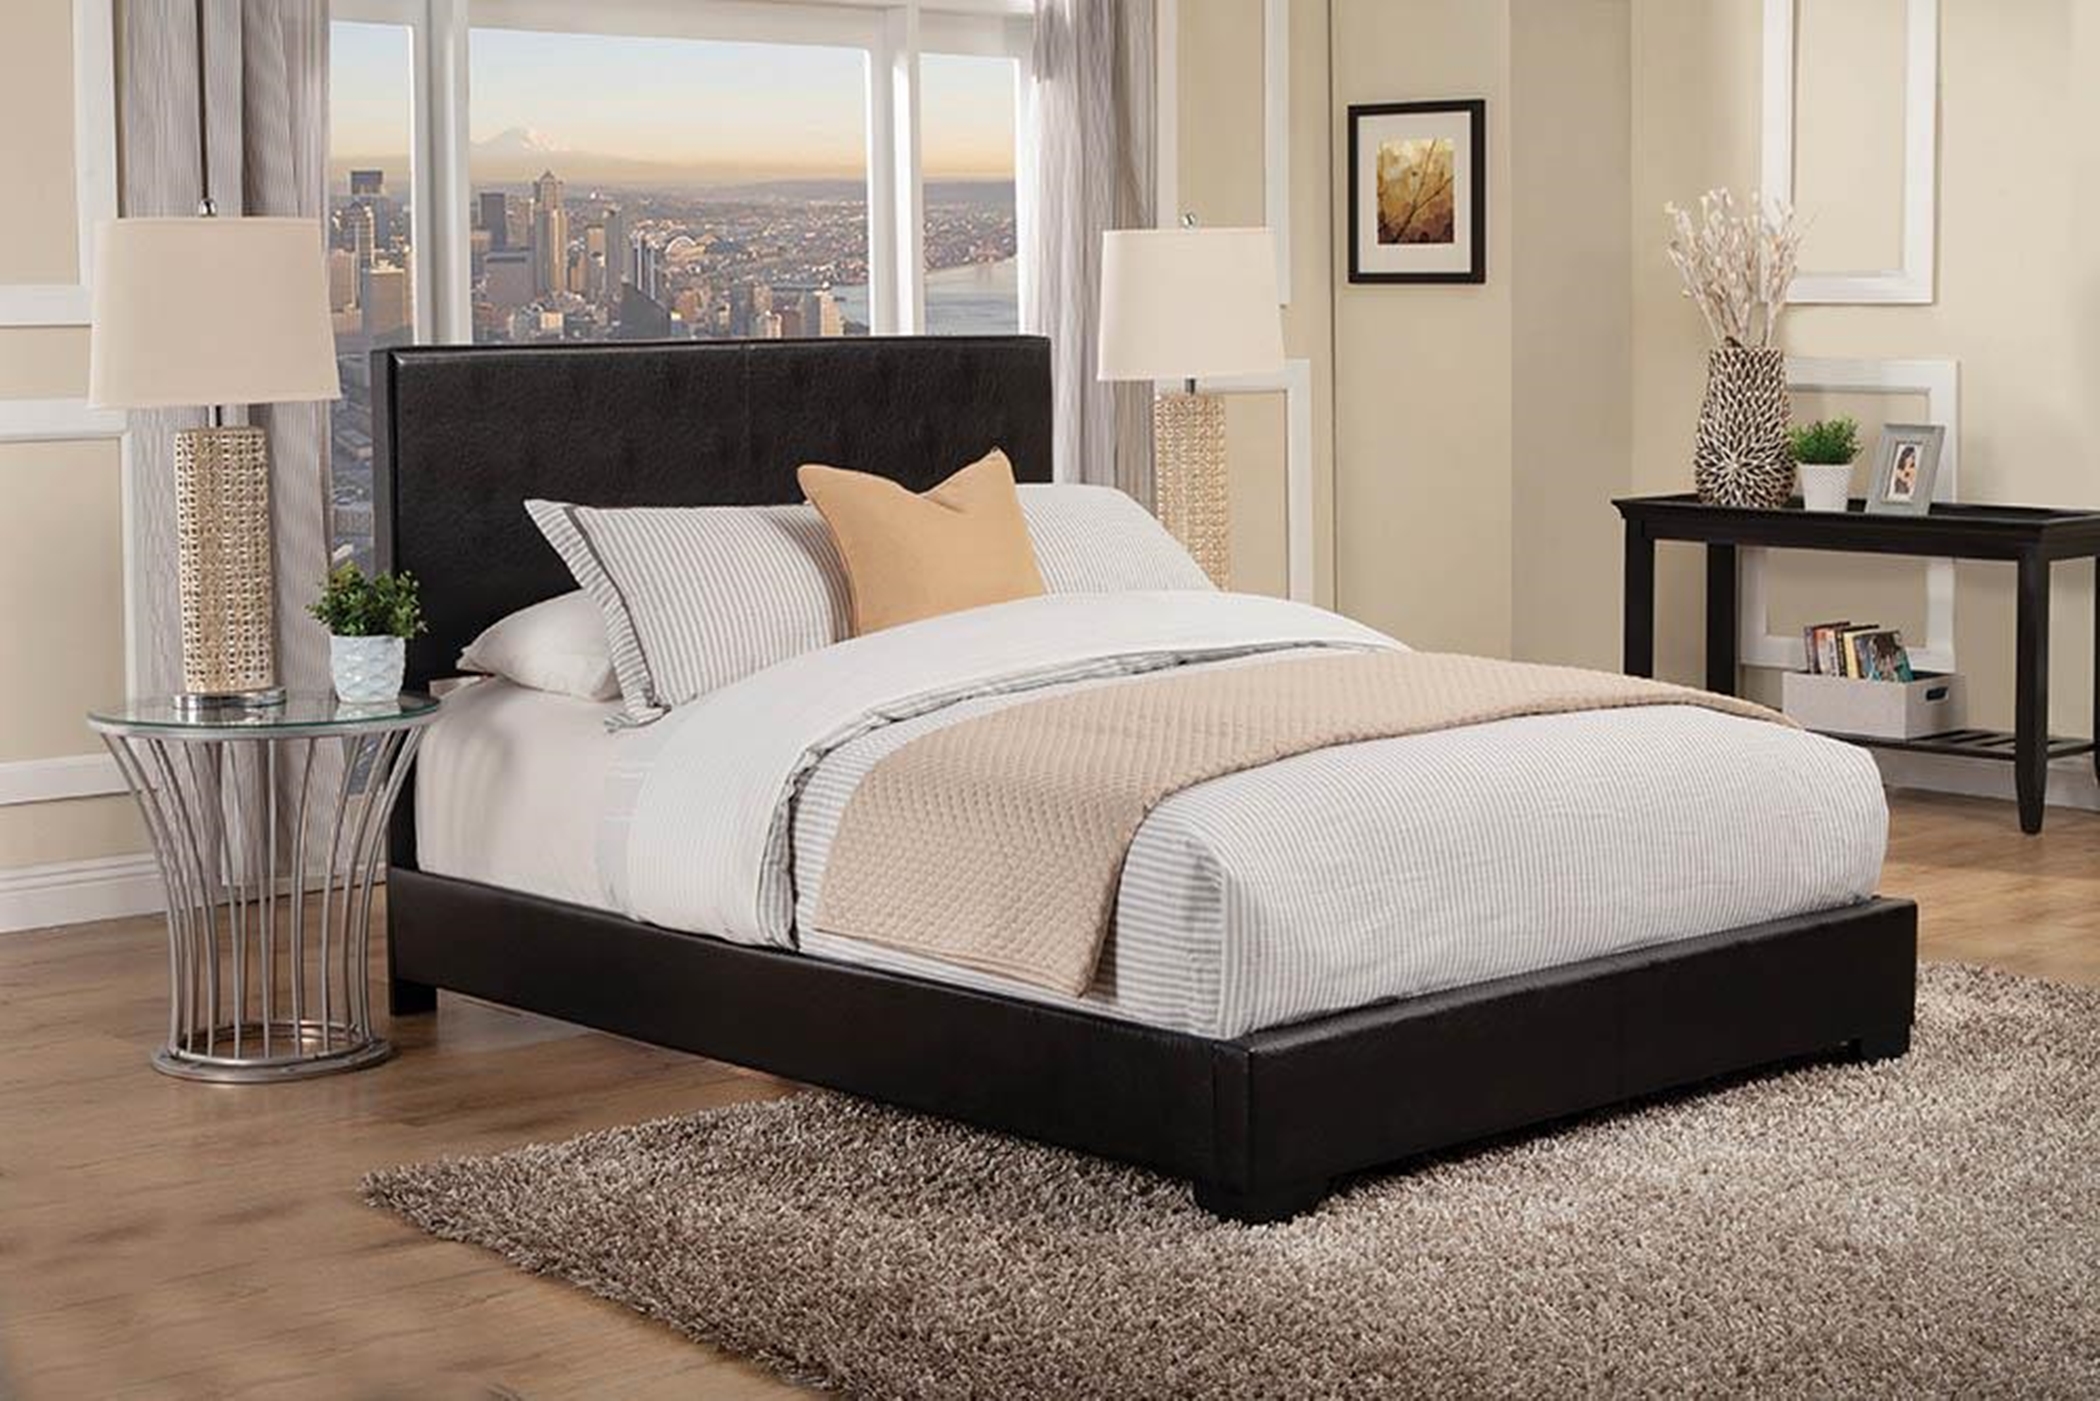 Conner Casual Black Upholstered Queen Bed